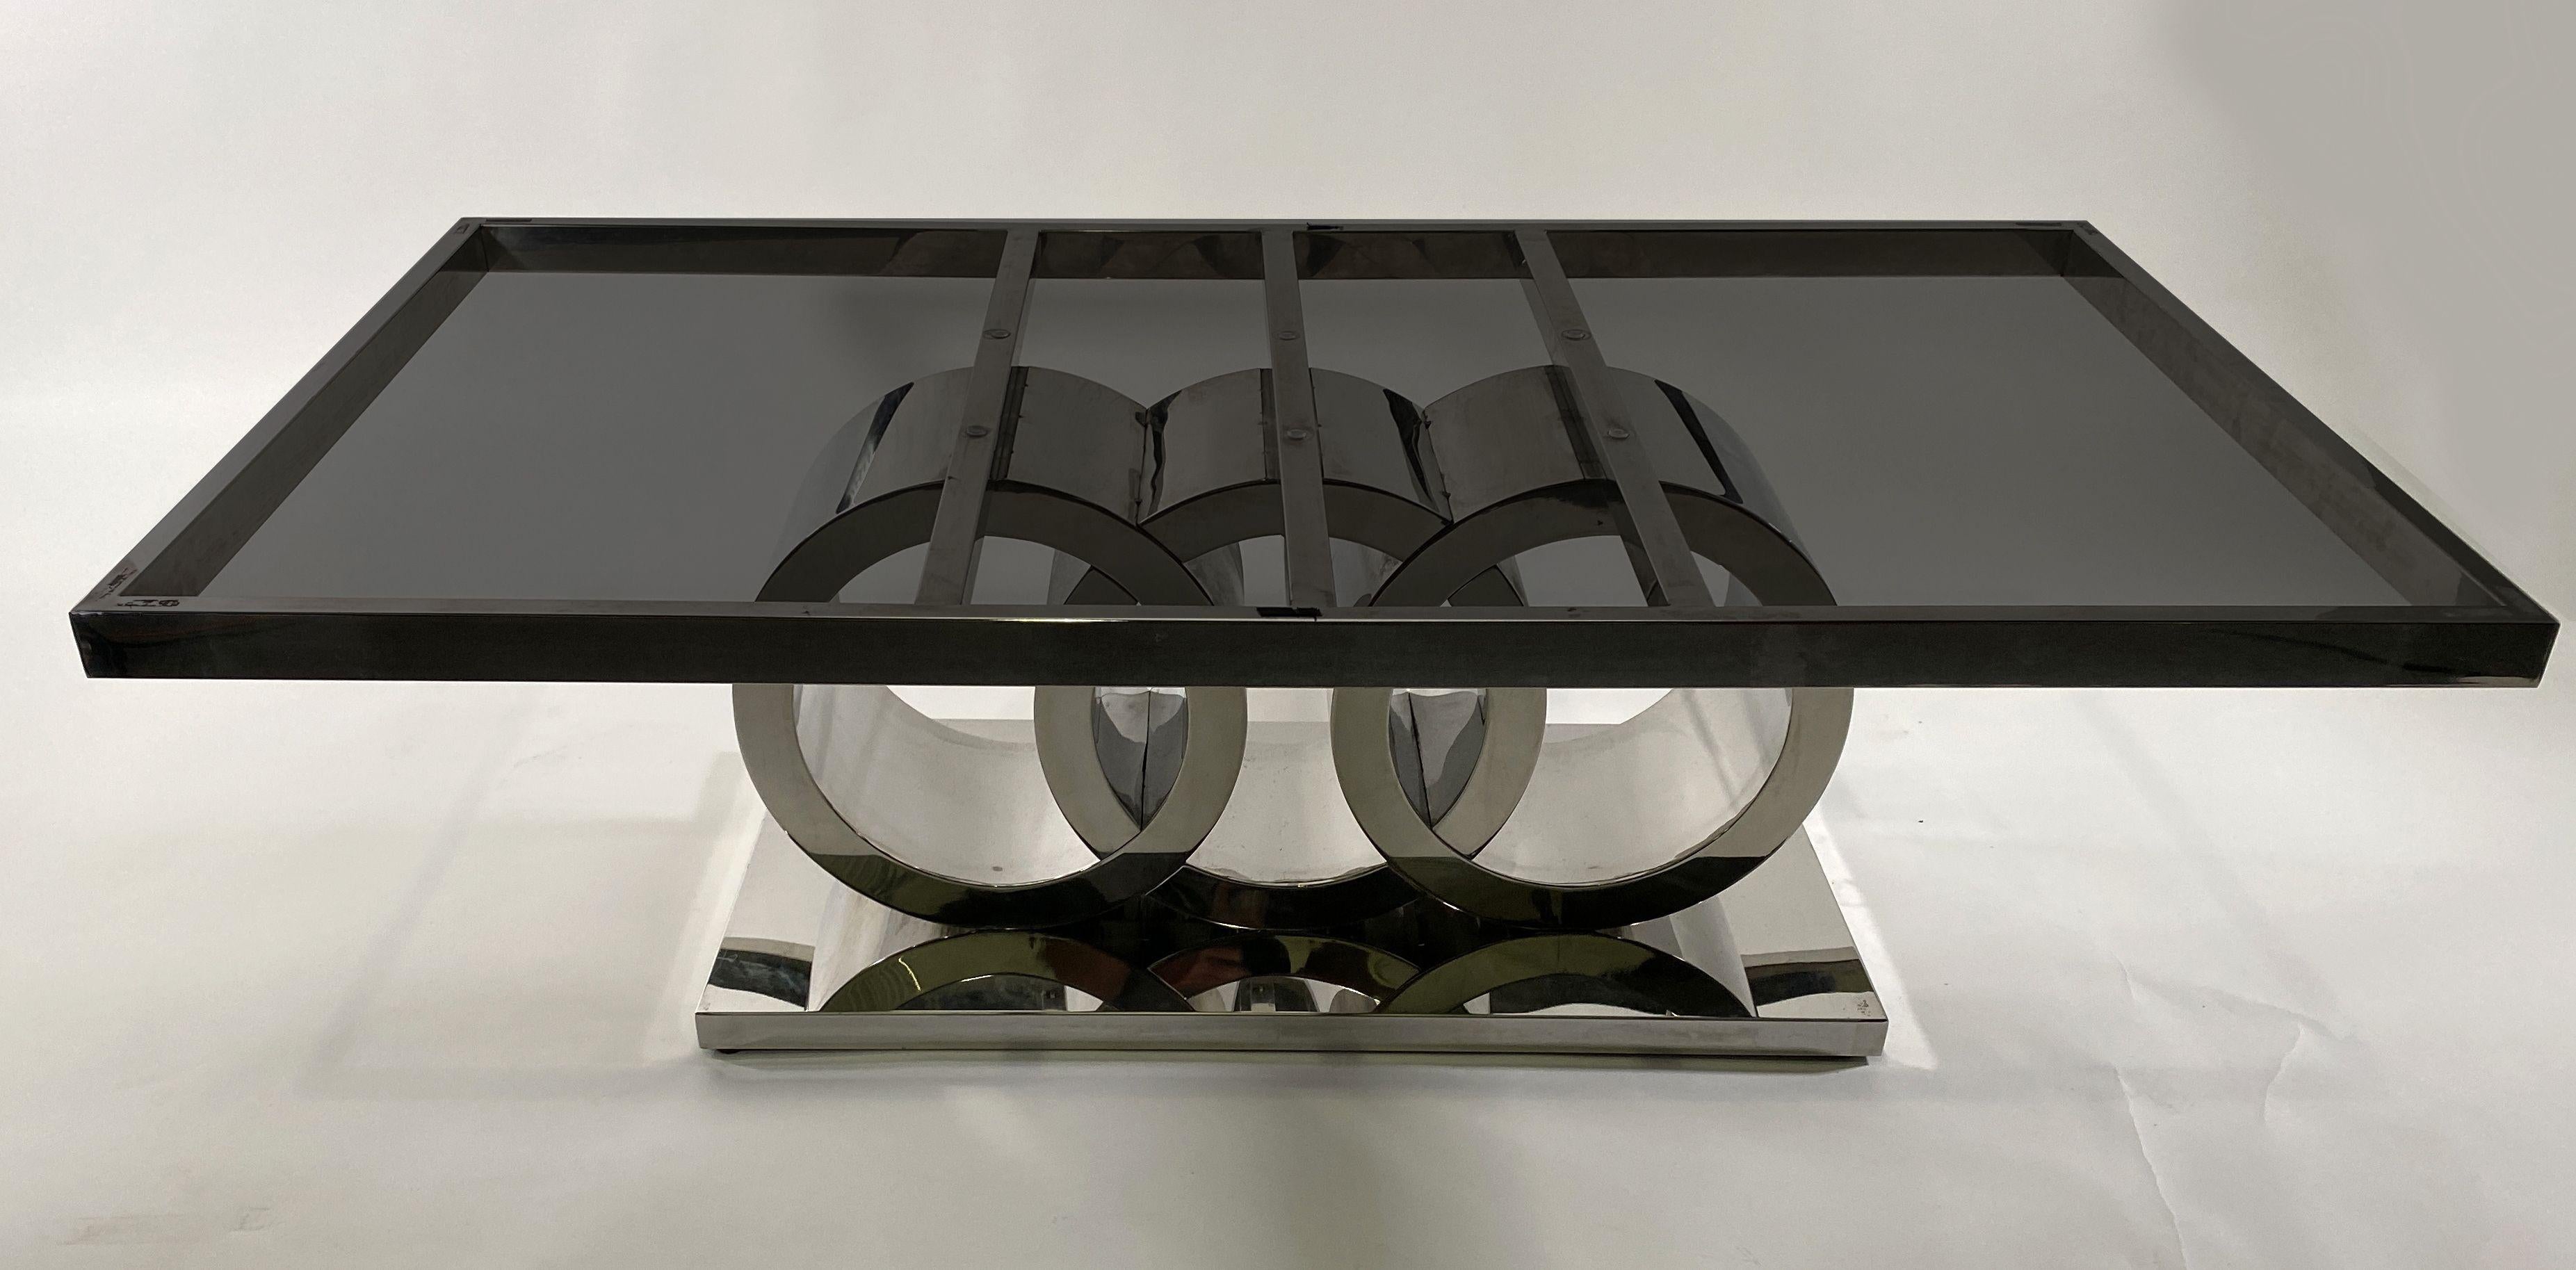 American Modern Art Deco Nickel chrome coffee table by Donald Deskey. The rectangular top being held up by 3 supporting rings on a chrome footed base.